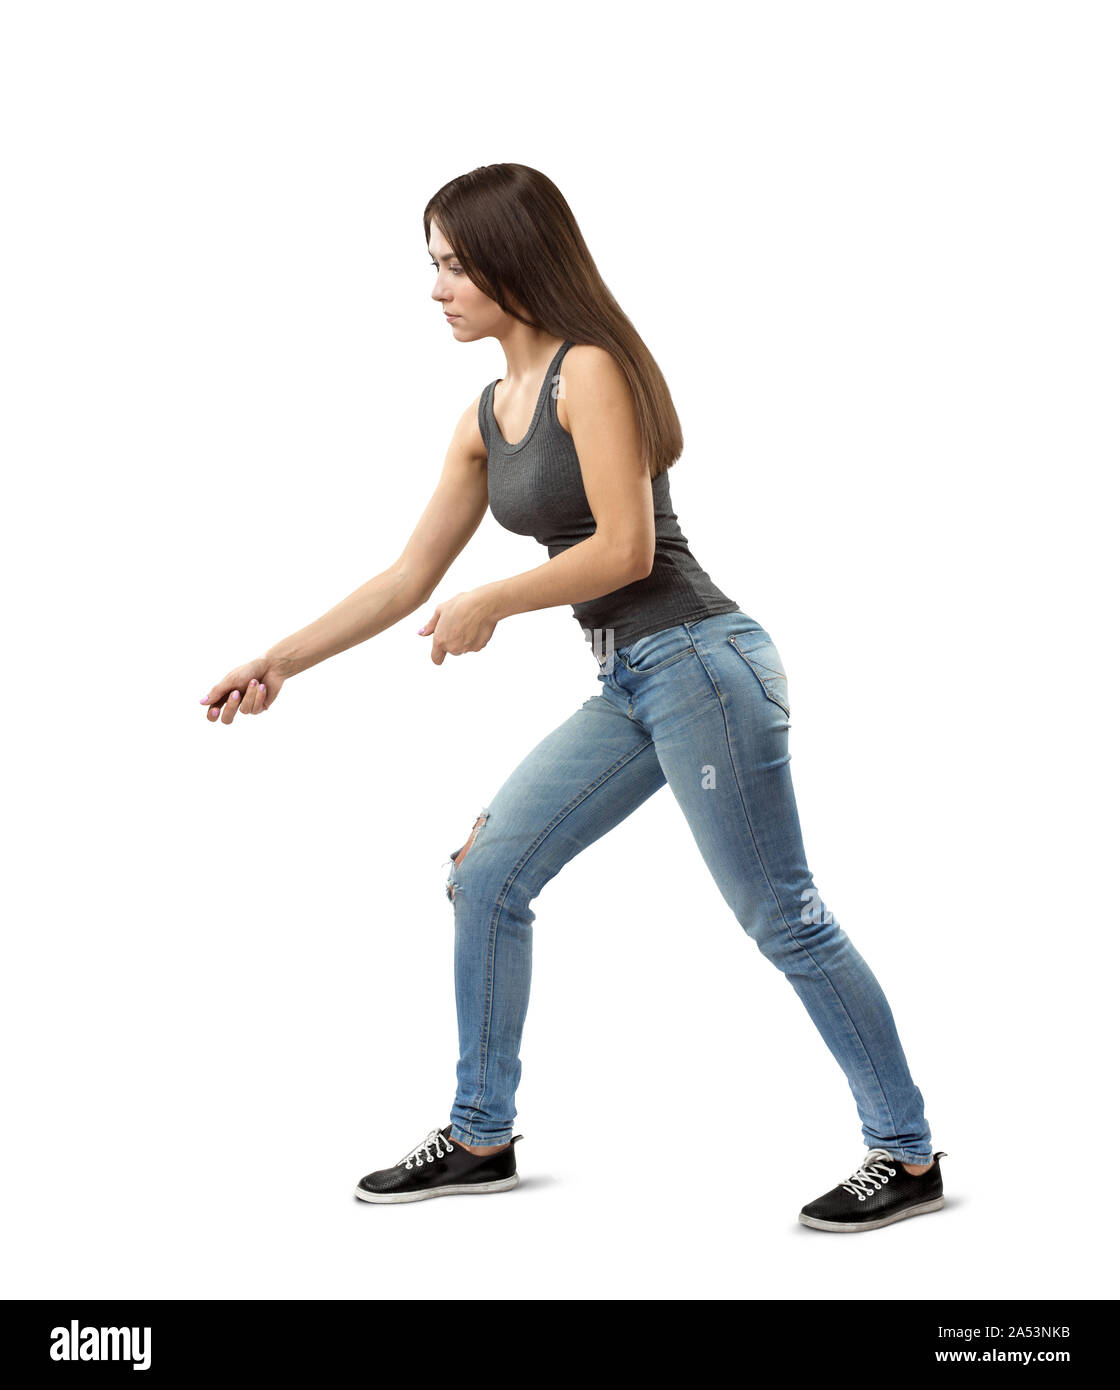 Side view of young fit woman in gray top and blue jeans bending forward  slightly and posing as if holding invisible rope isolated on white  background Stock Photo - Alamy